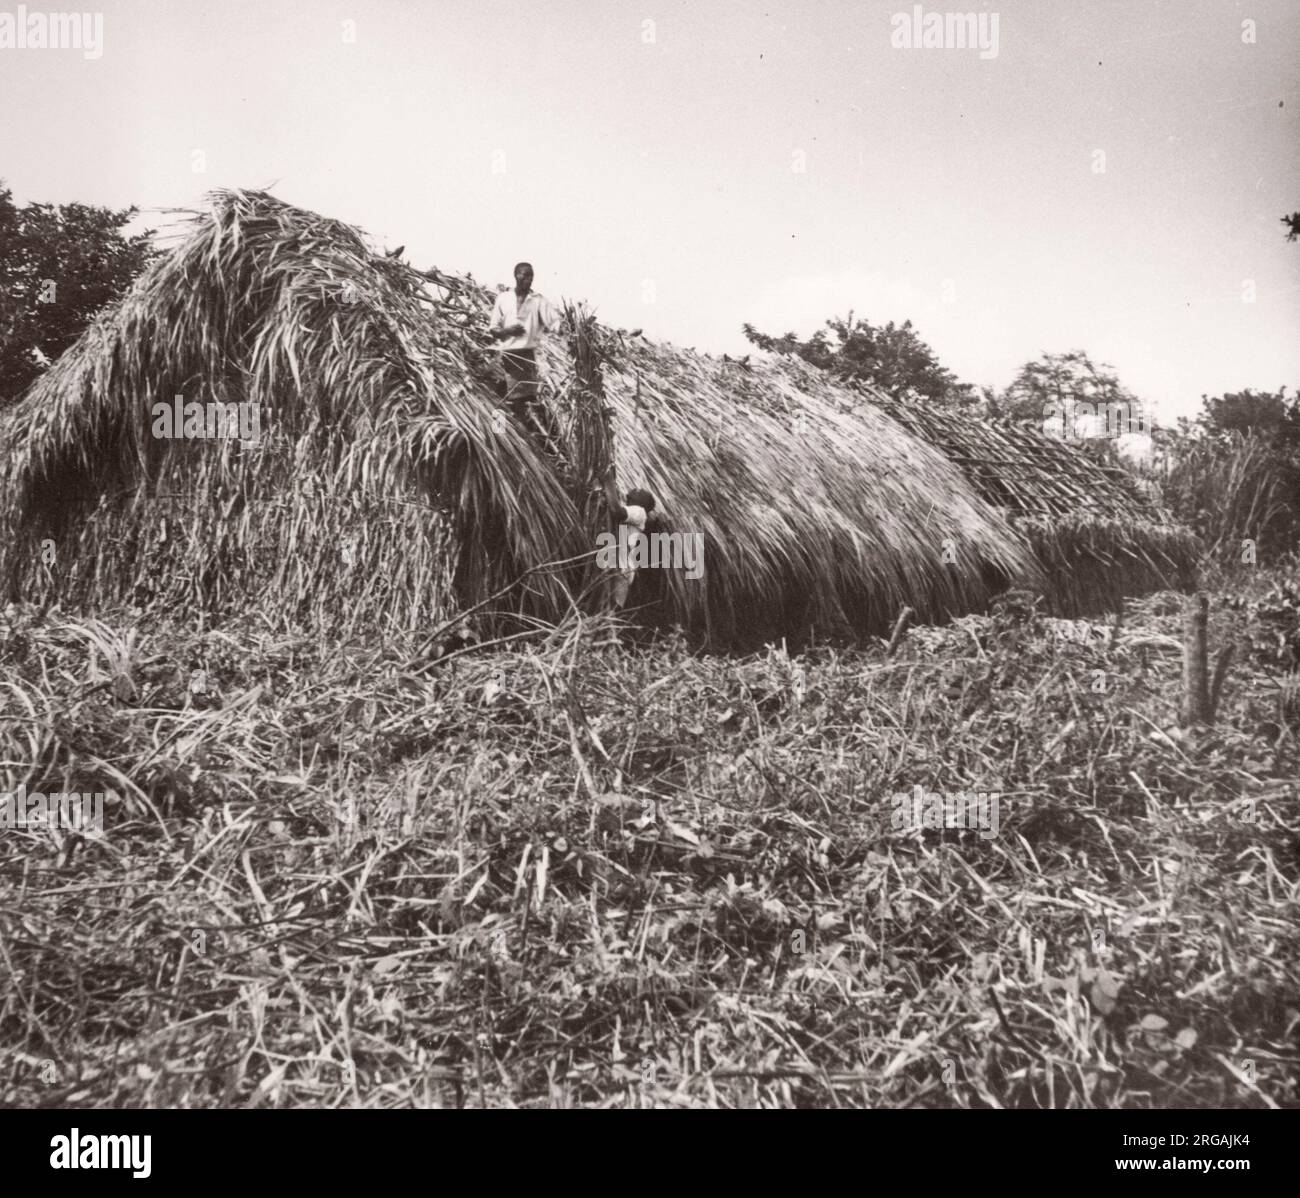 1940s East Africa Uganda - growing tobacco - farming and processing Photograph by a British army recruitment officer stationed in East Africa and the Middle East during World War II Stock Photo